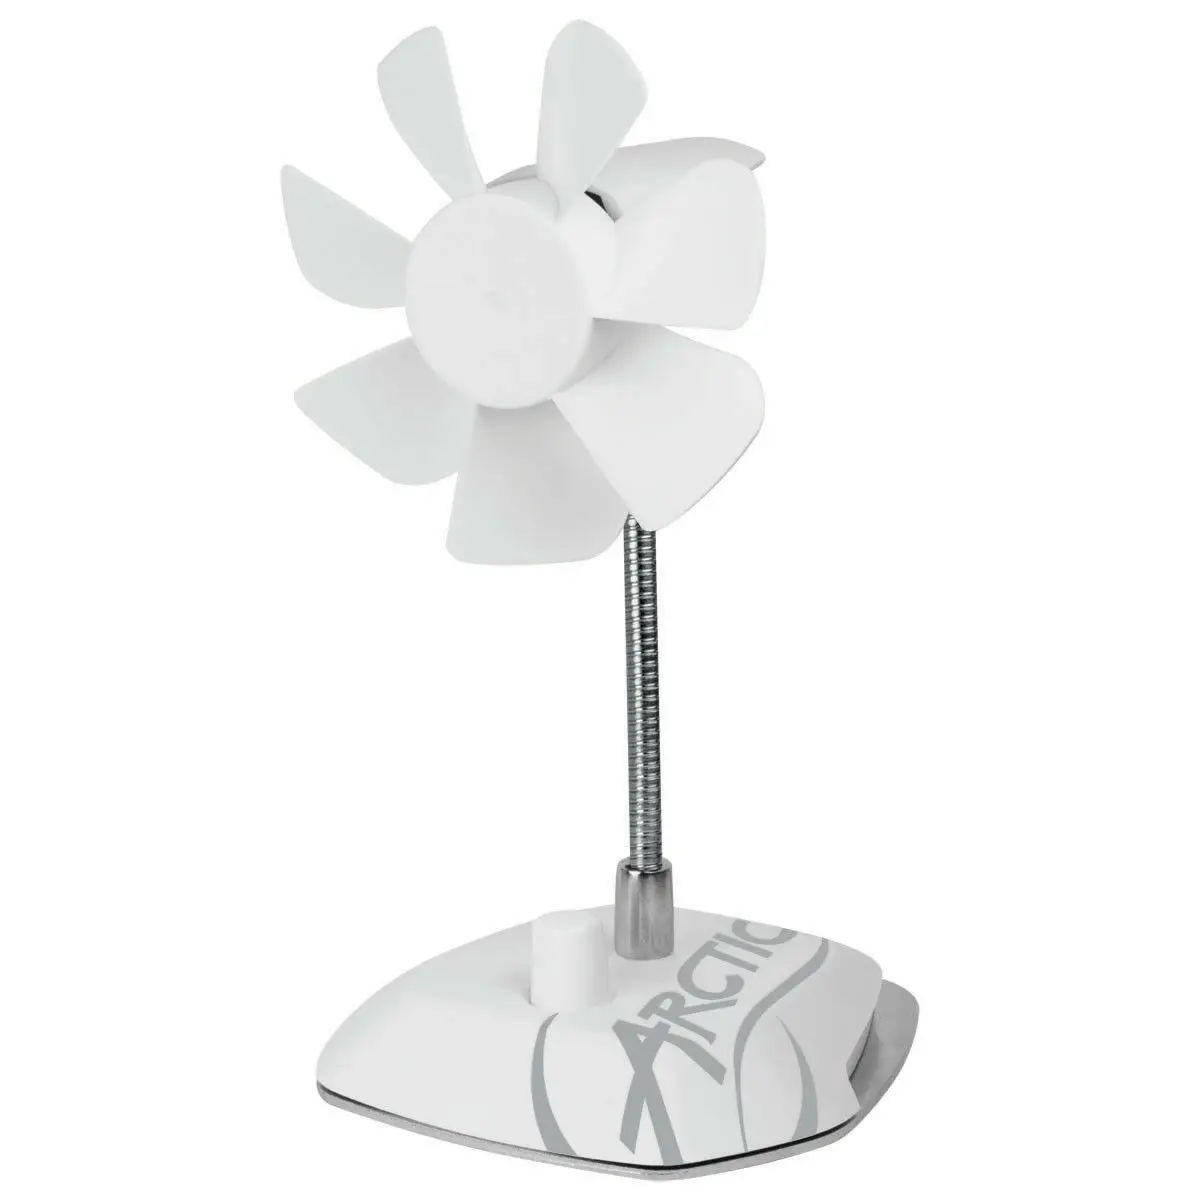 New Arctic Breeze White Usb Table Cooling Fan Desktop Laptop Abaco-brzwh01-bl - Pc Components Cooling & - AliExpress